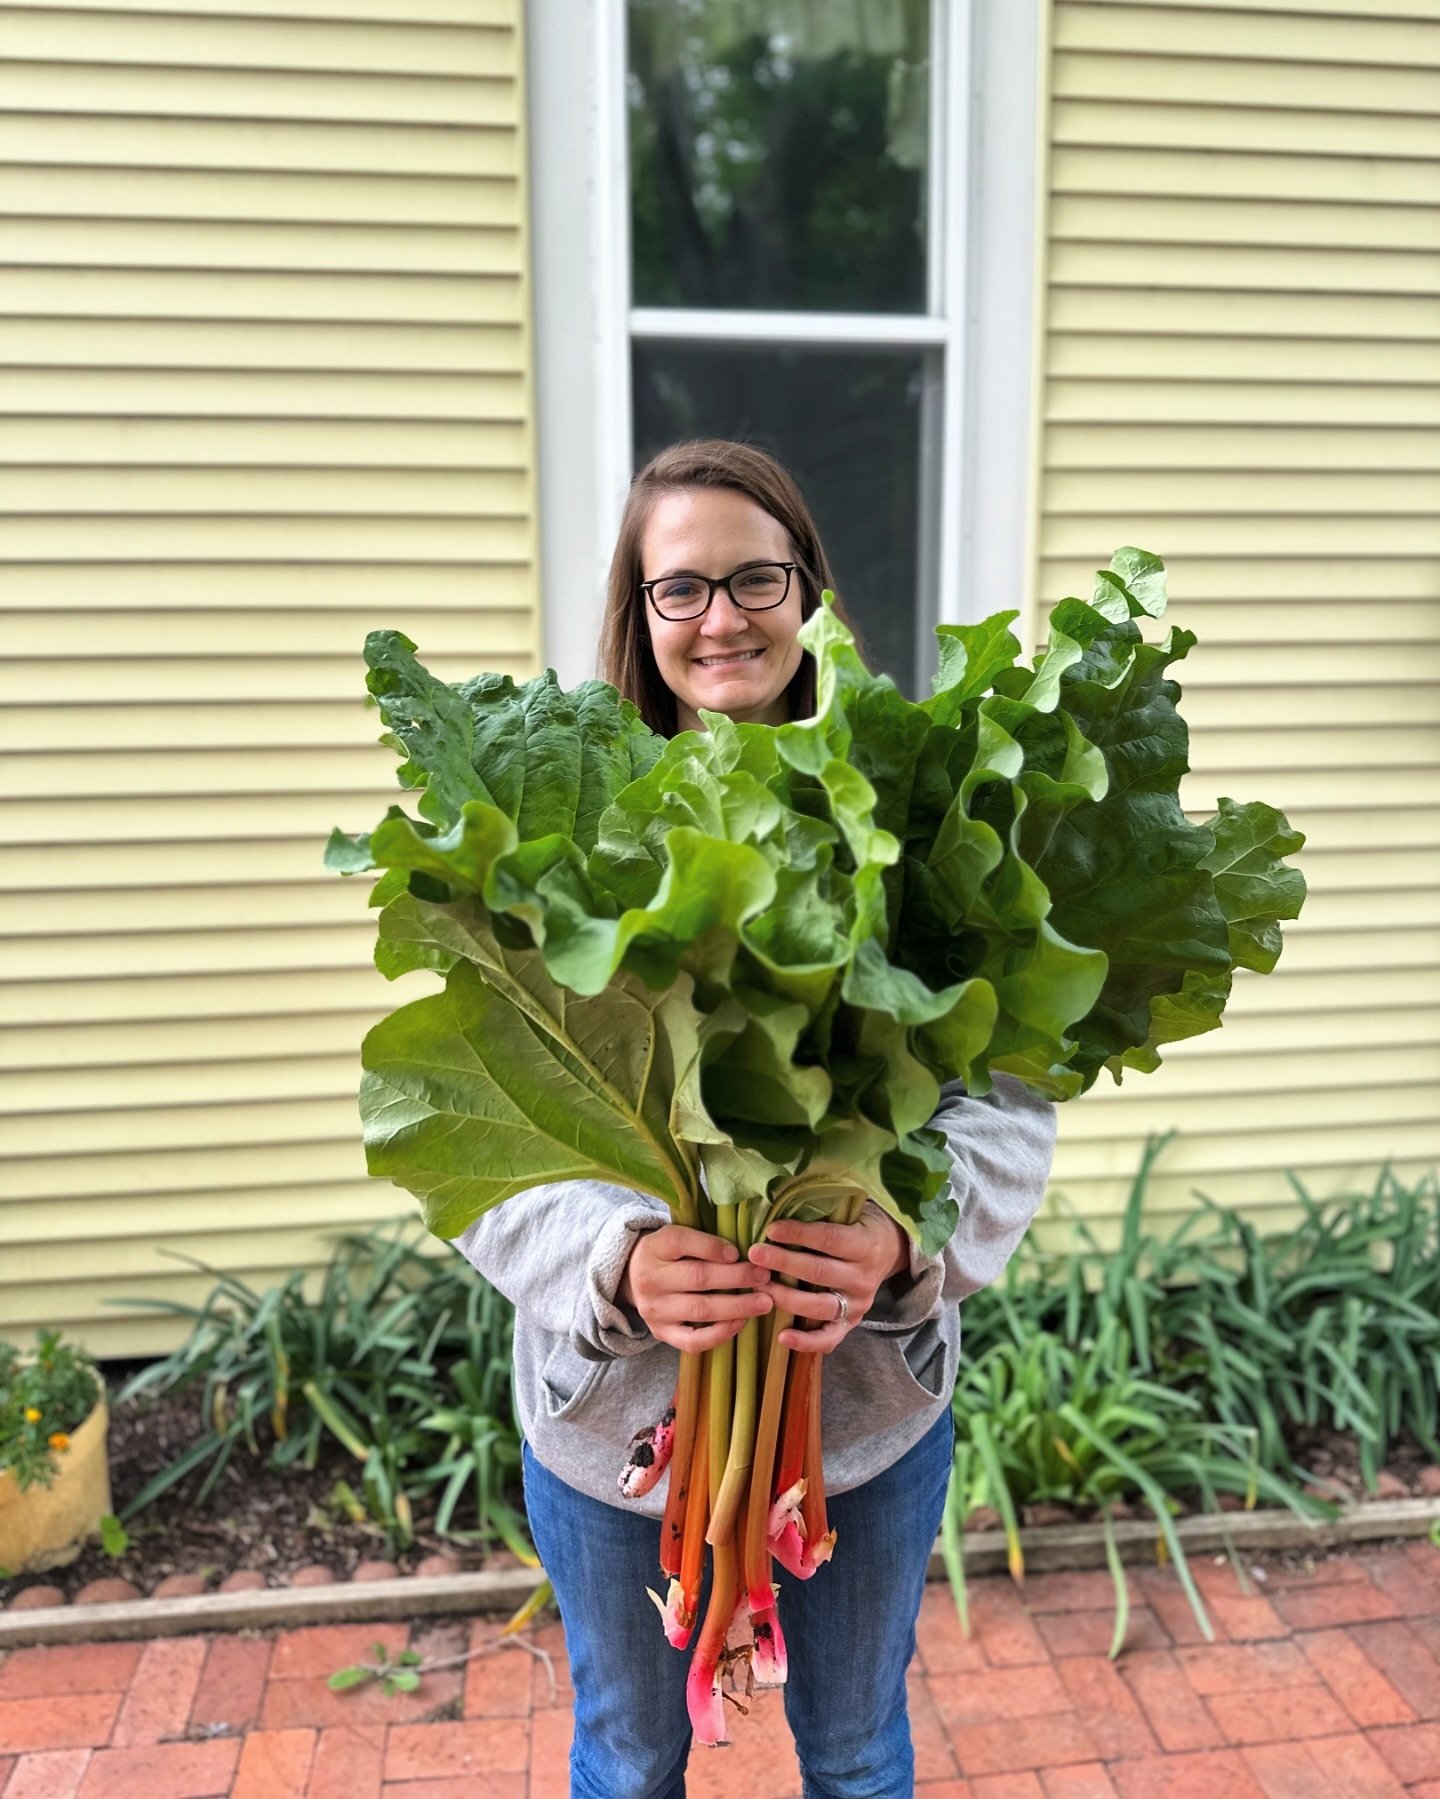 Chef Michelle harvesting home-grown Rhubarb for a new dessert tonight! Rhubarb is one of our favorite spring ingredients because of its versatility in both sweet + savory dishes. 

Reservations for the week are filling up, so head to Google to see wh